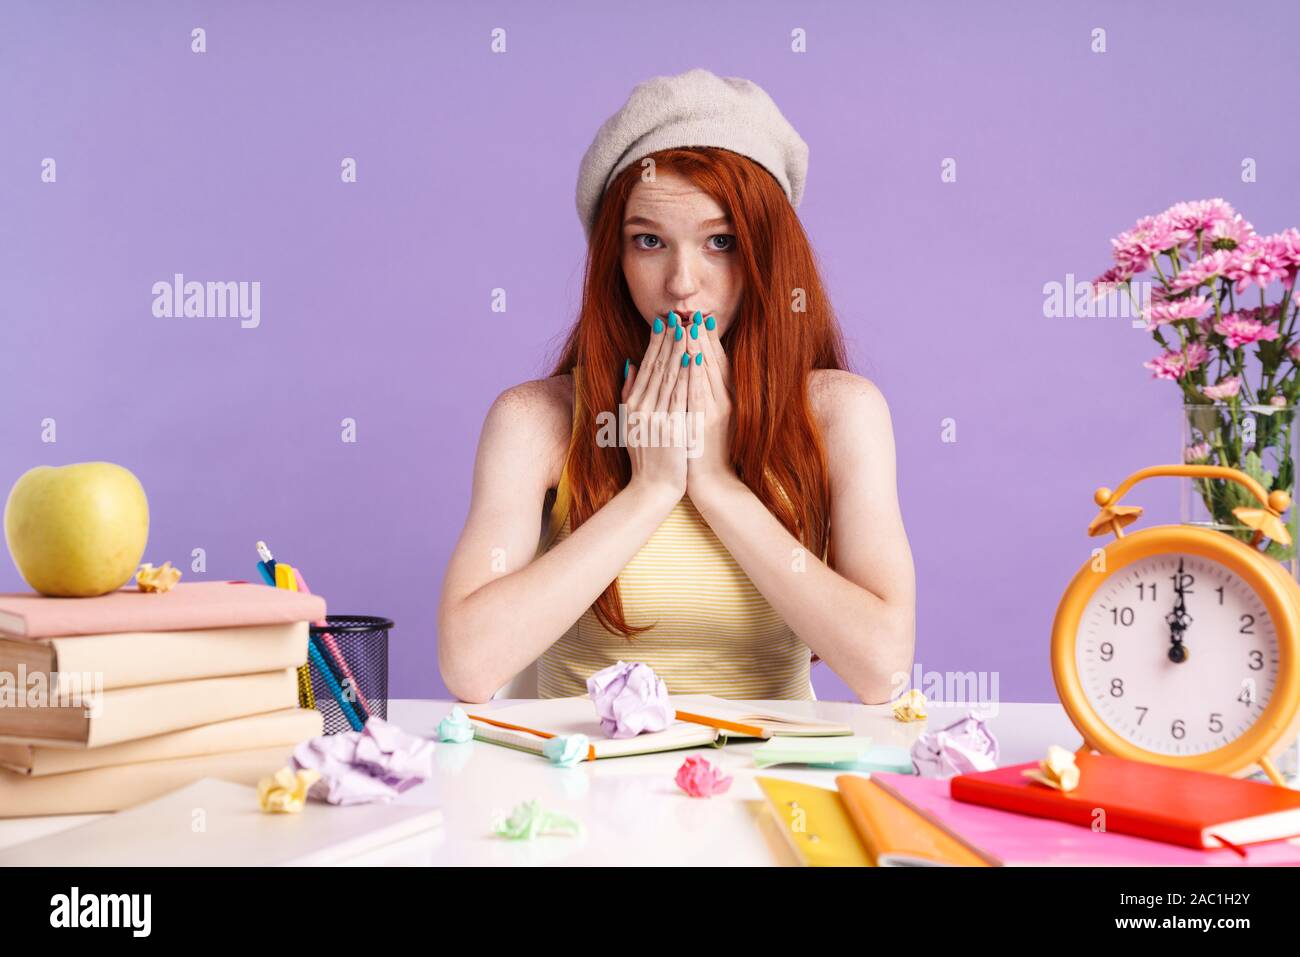 Photo Of Redhead Student Girl Covering Her Mouh While Sitting At